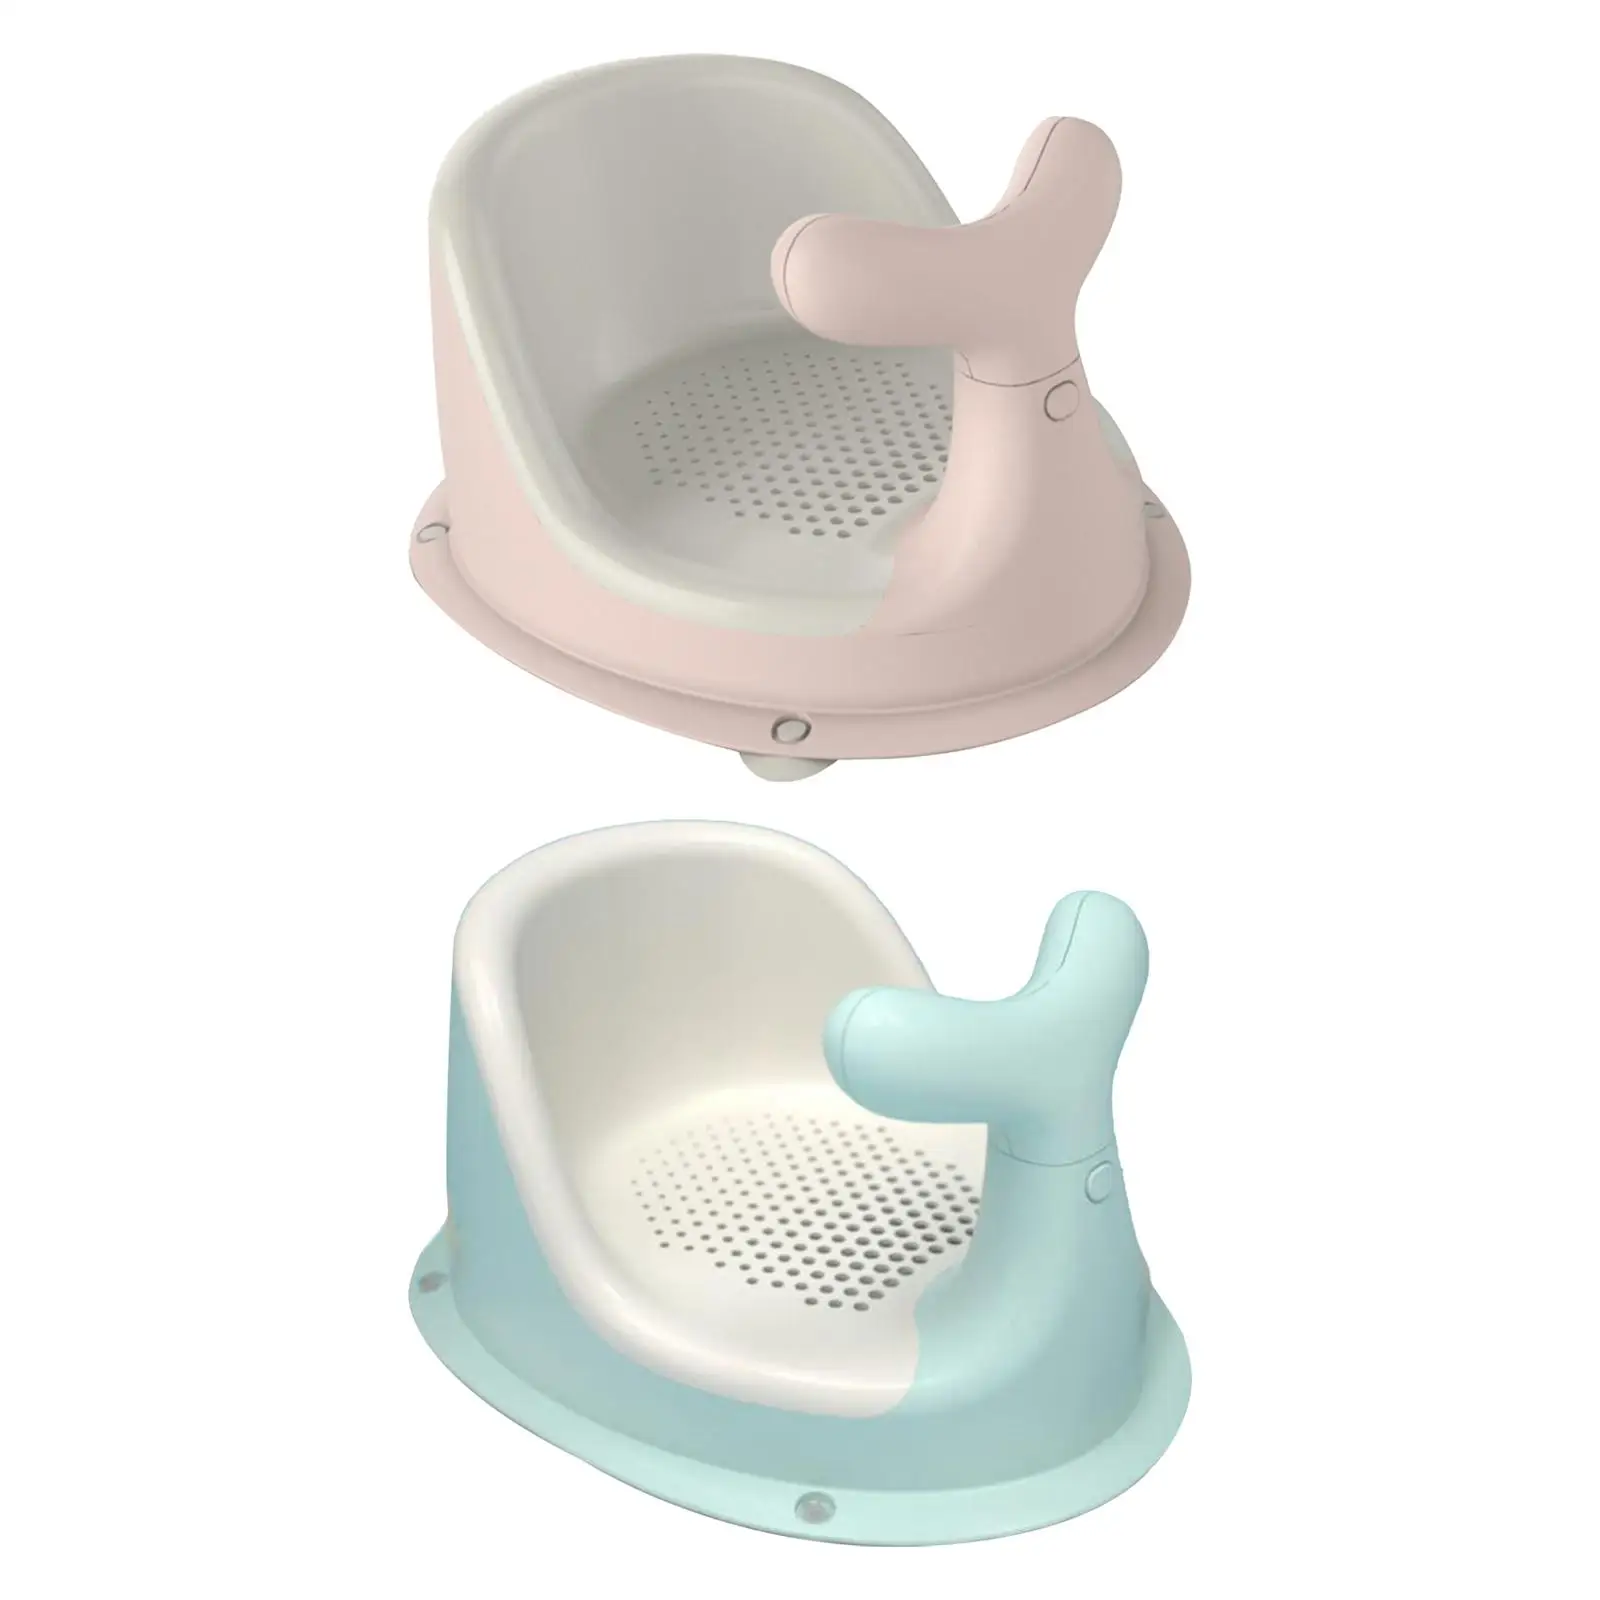 Baby Bath Tub Seat Assisted Sitting Non Slip Soft Mat Sit up for Bathroom